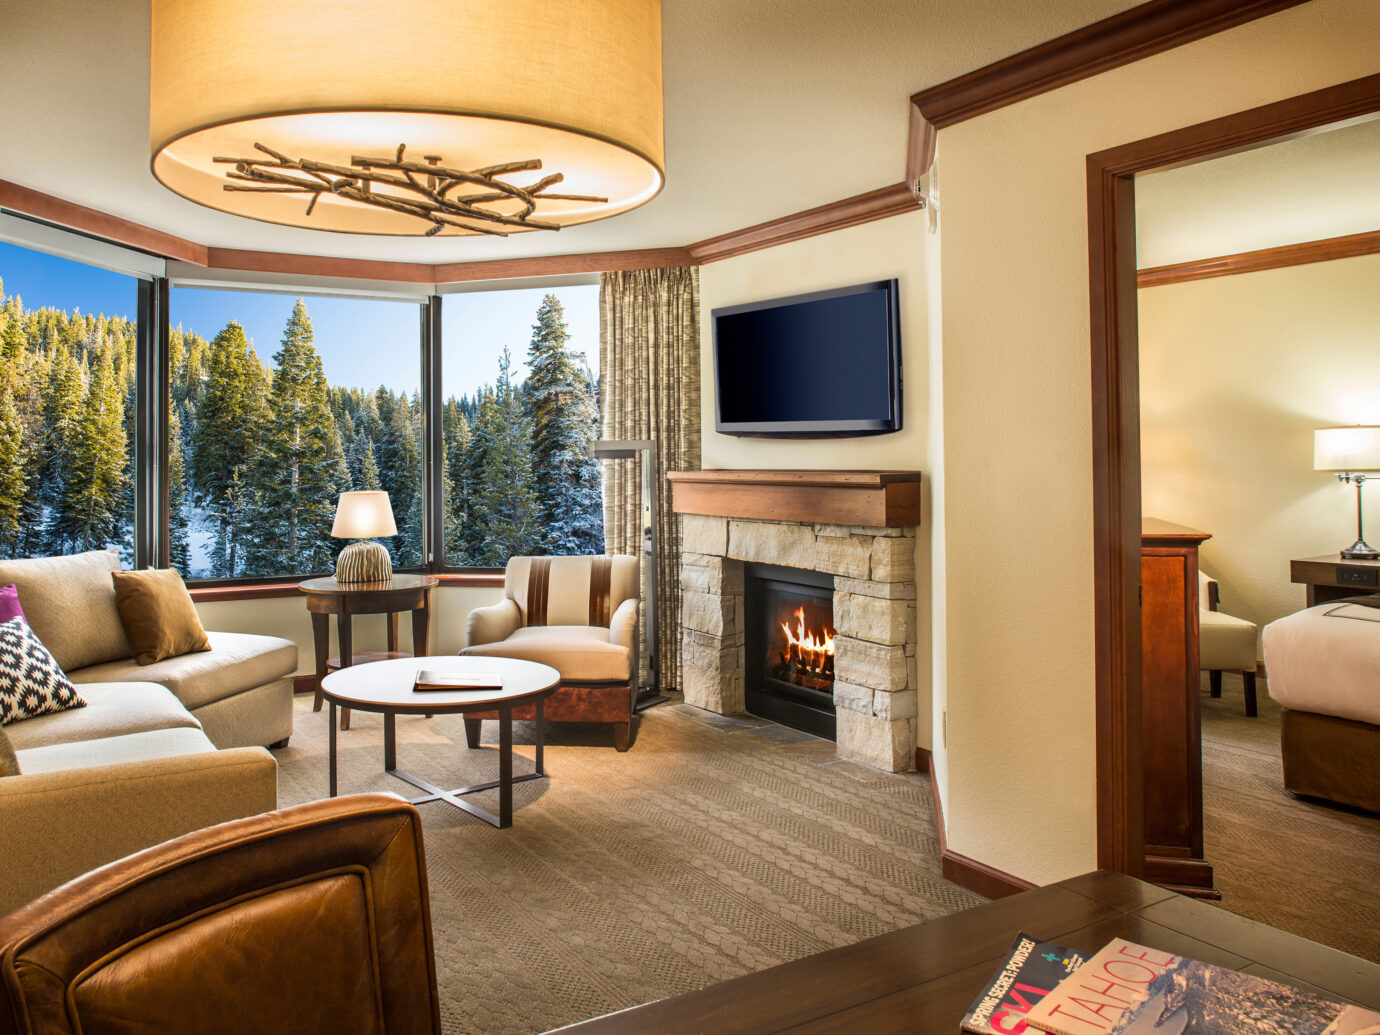 Suite at Resort at Squaw Creek, Olympic Valley, CA